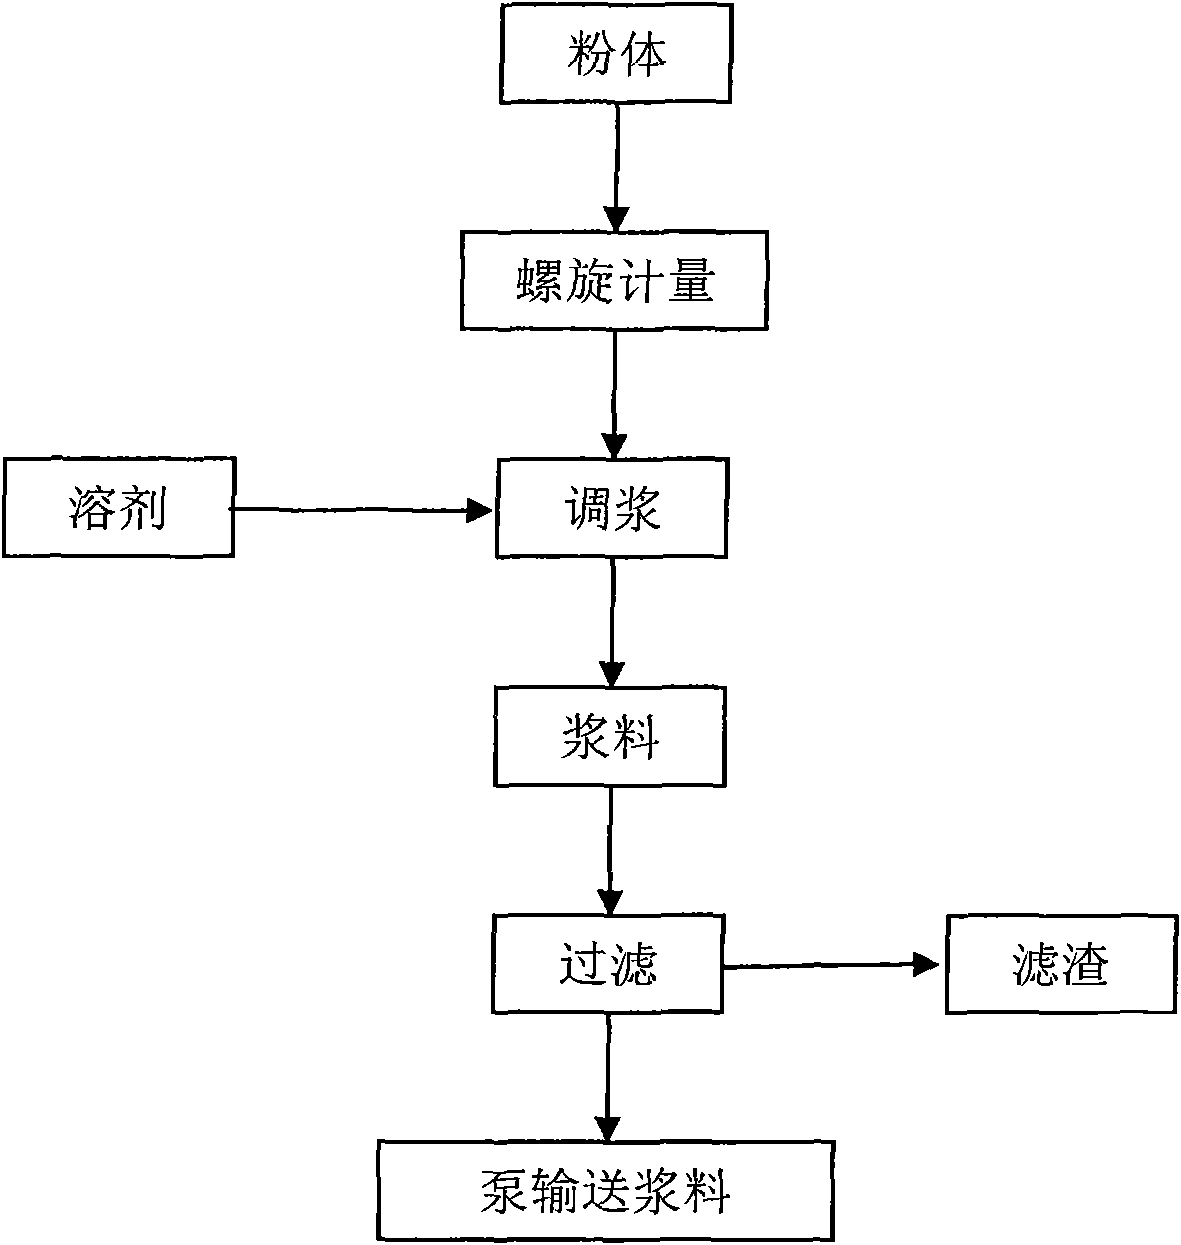 Quantitive slurry conveying equipment and method for conveying slurry